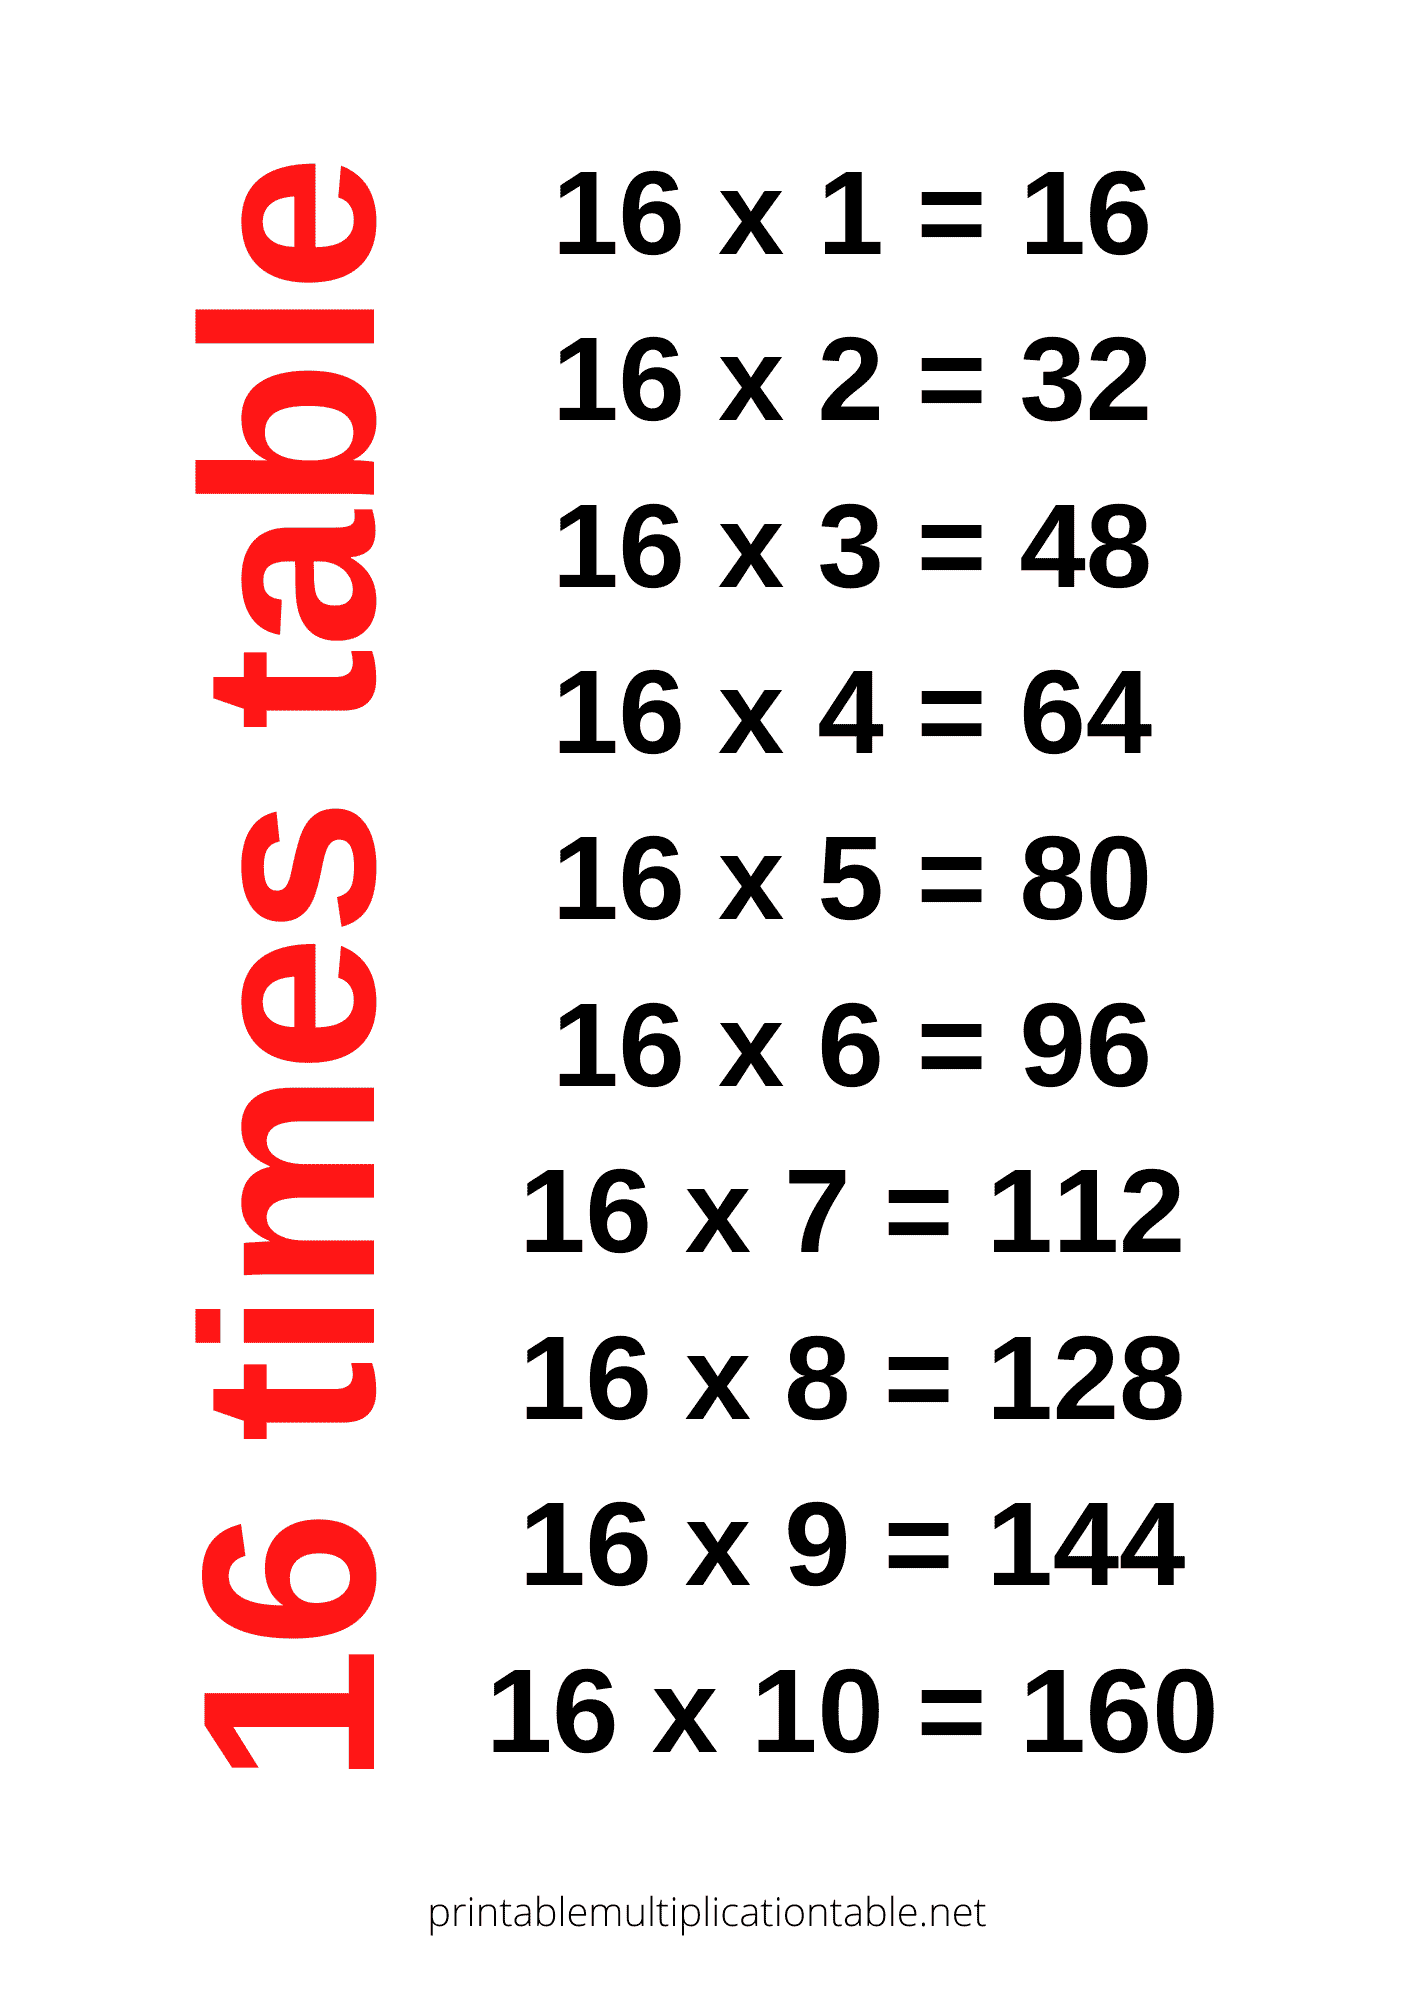 16 times table chart